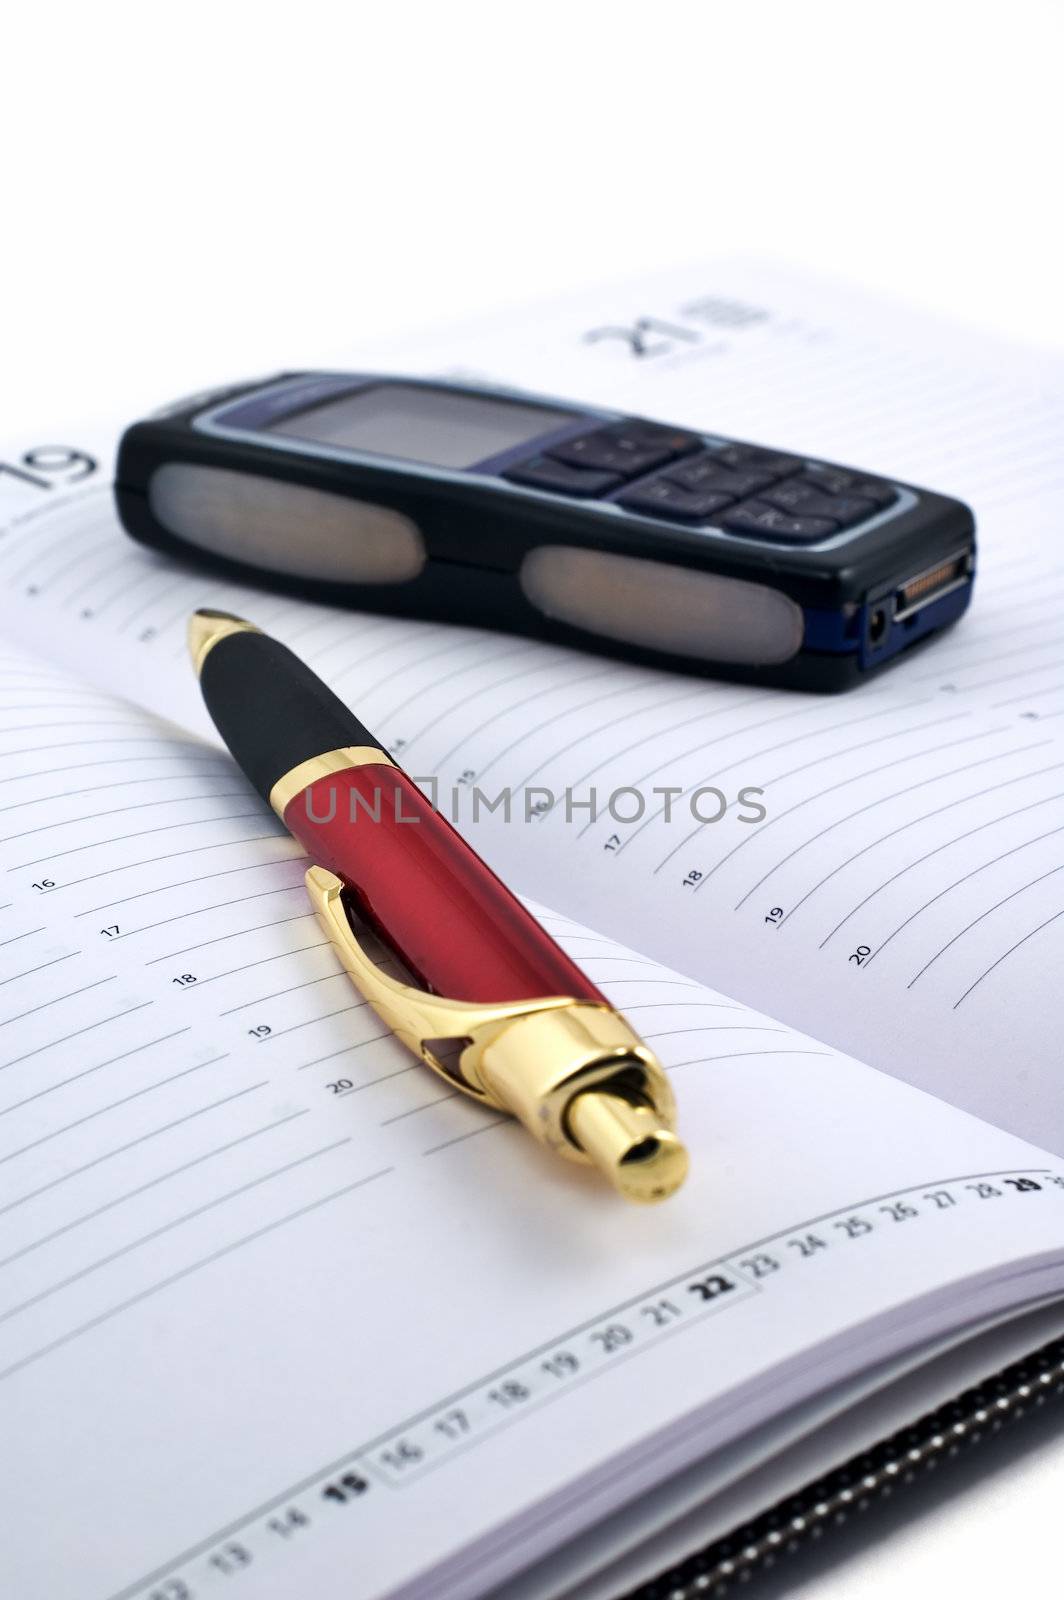 Pen and cell phone on open agenda with shallow depth of field